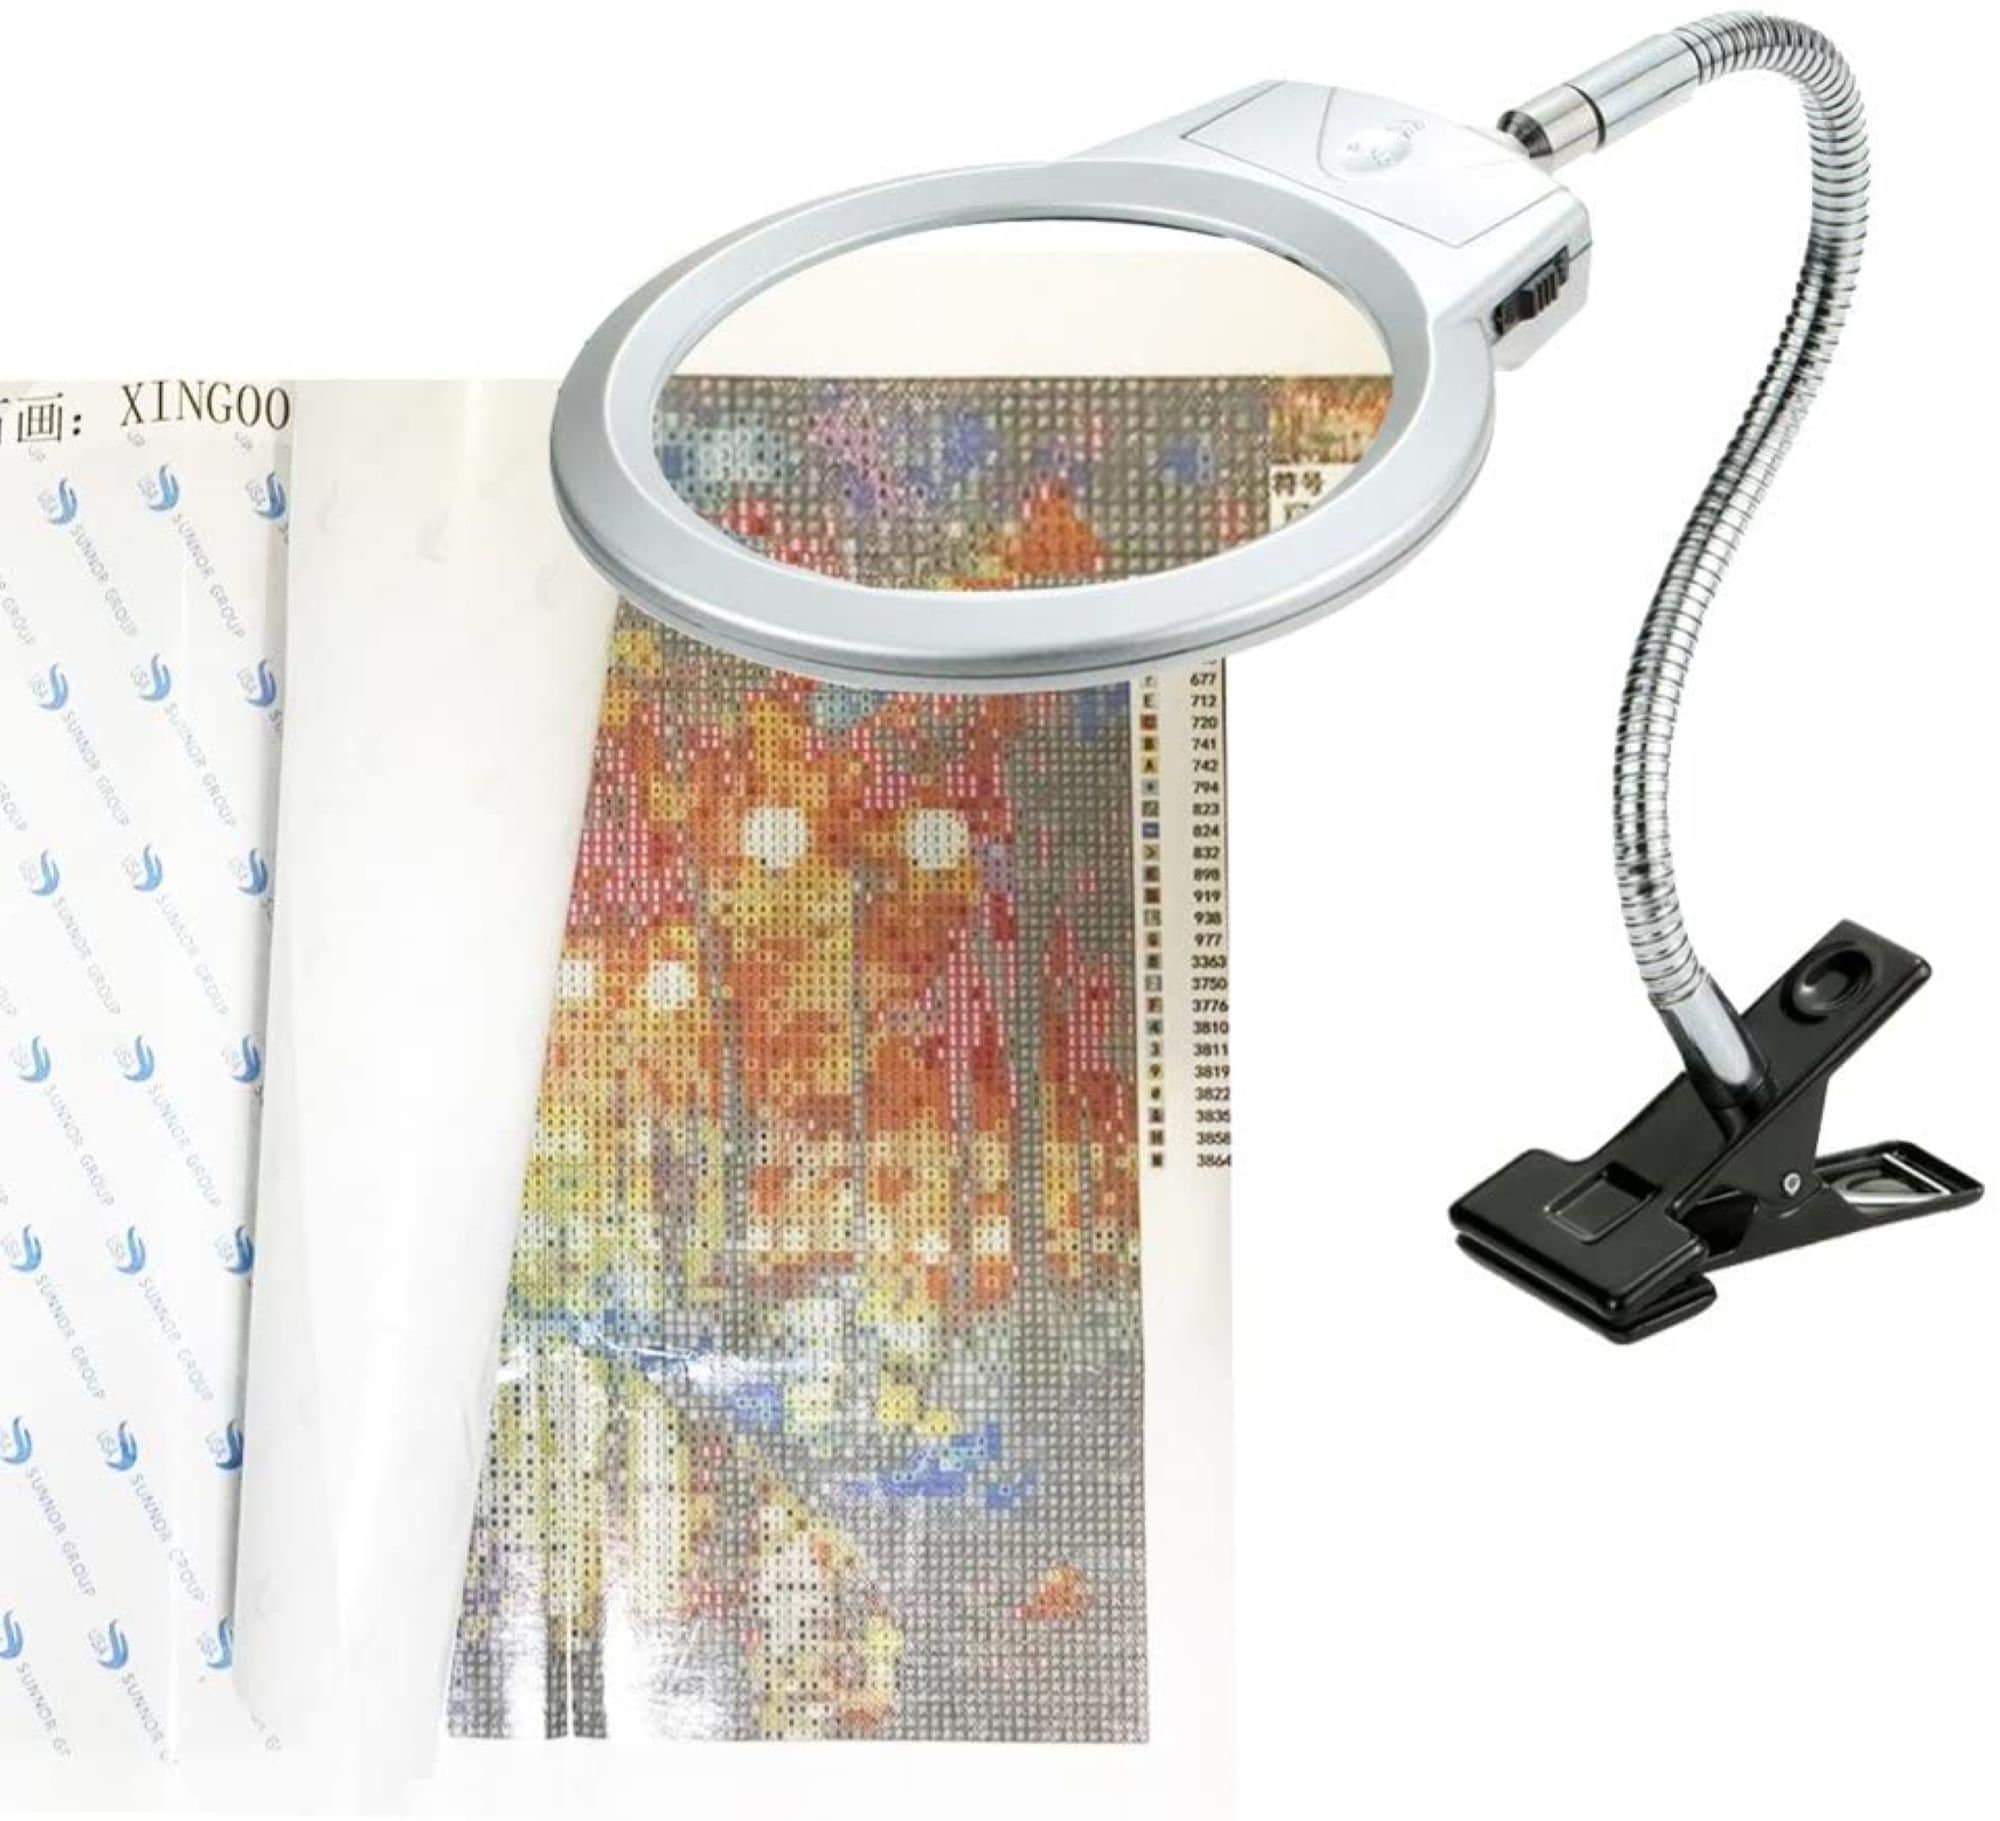 Expert Set Vision Aid ™ Magnifying Glasses With Light & Storage Case,  Diamond Painting, Lash, Crafts, Cross Stitch Embroidery Sewing Hobby 